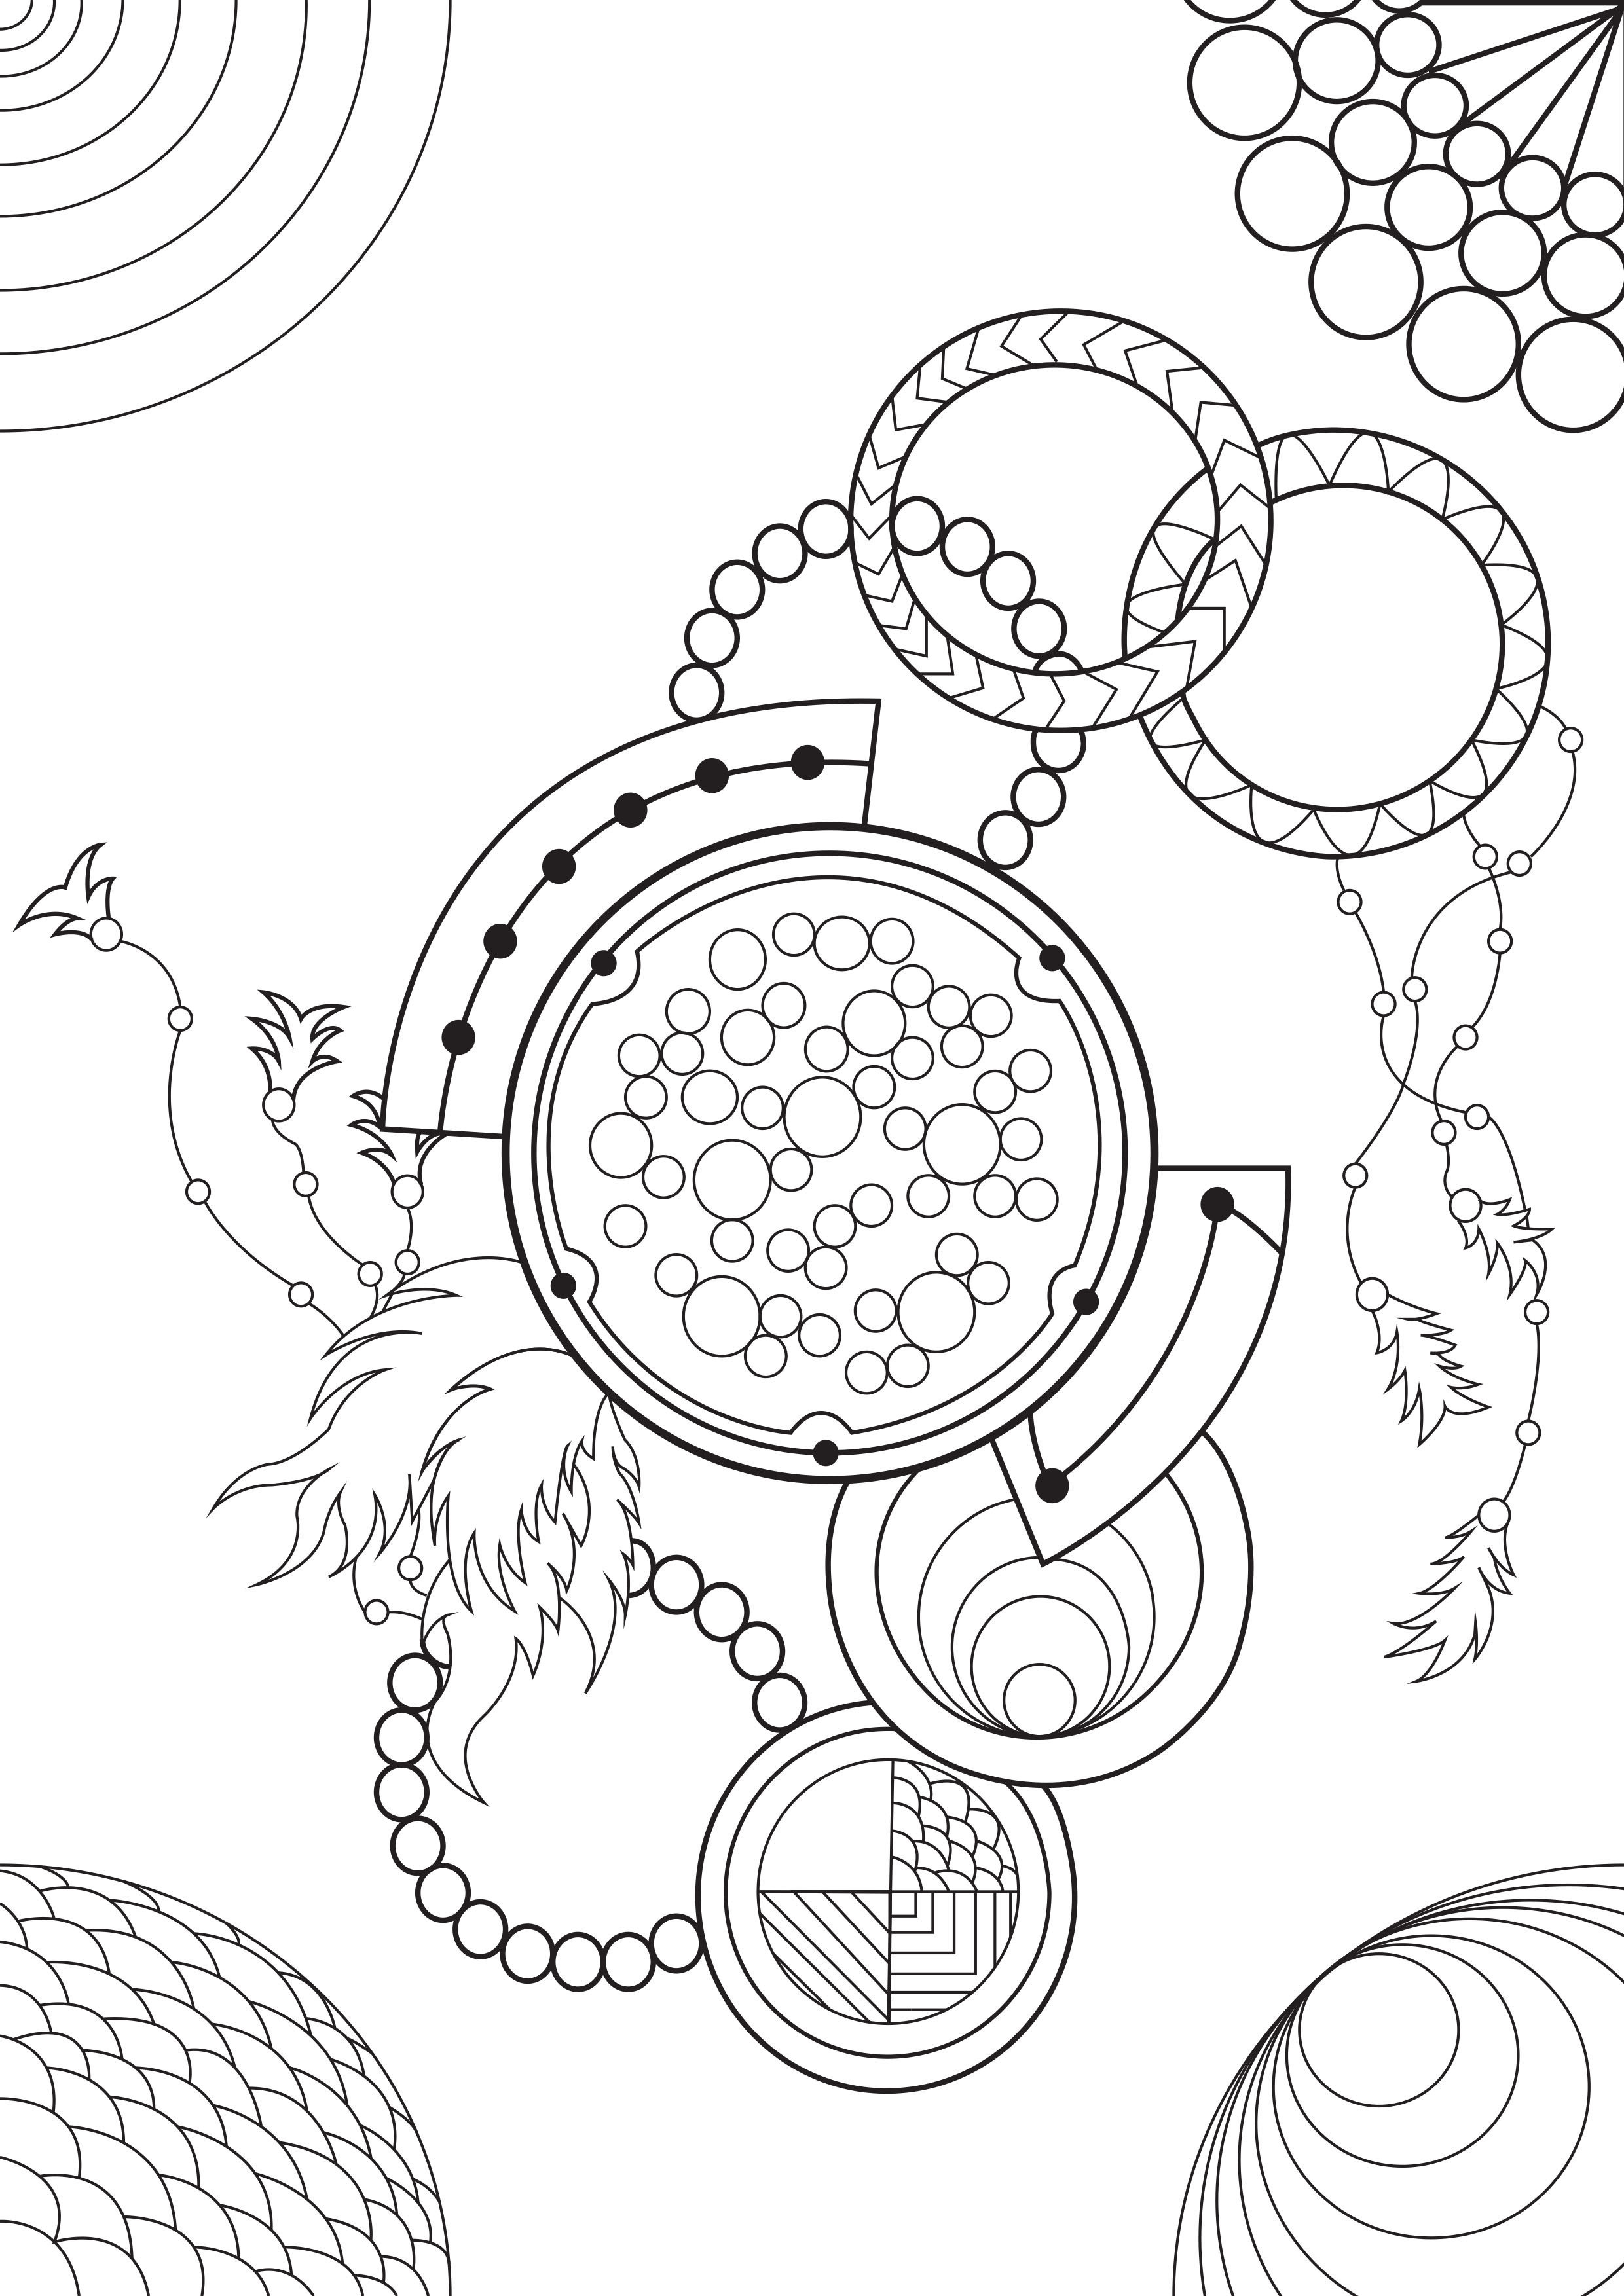 Adult coloring pages can be therapeutic, relaxing, calming, problem solving, and organizational. Here is a good example, Artist : Gamma